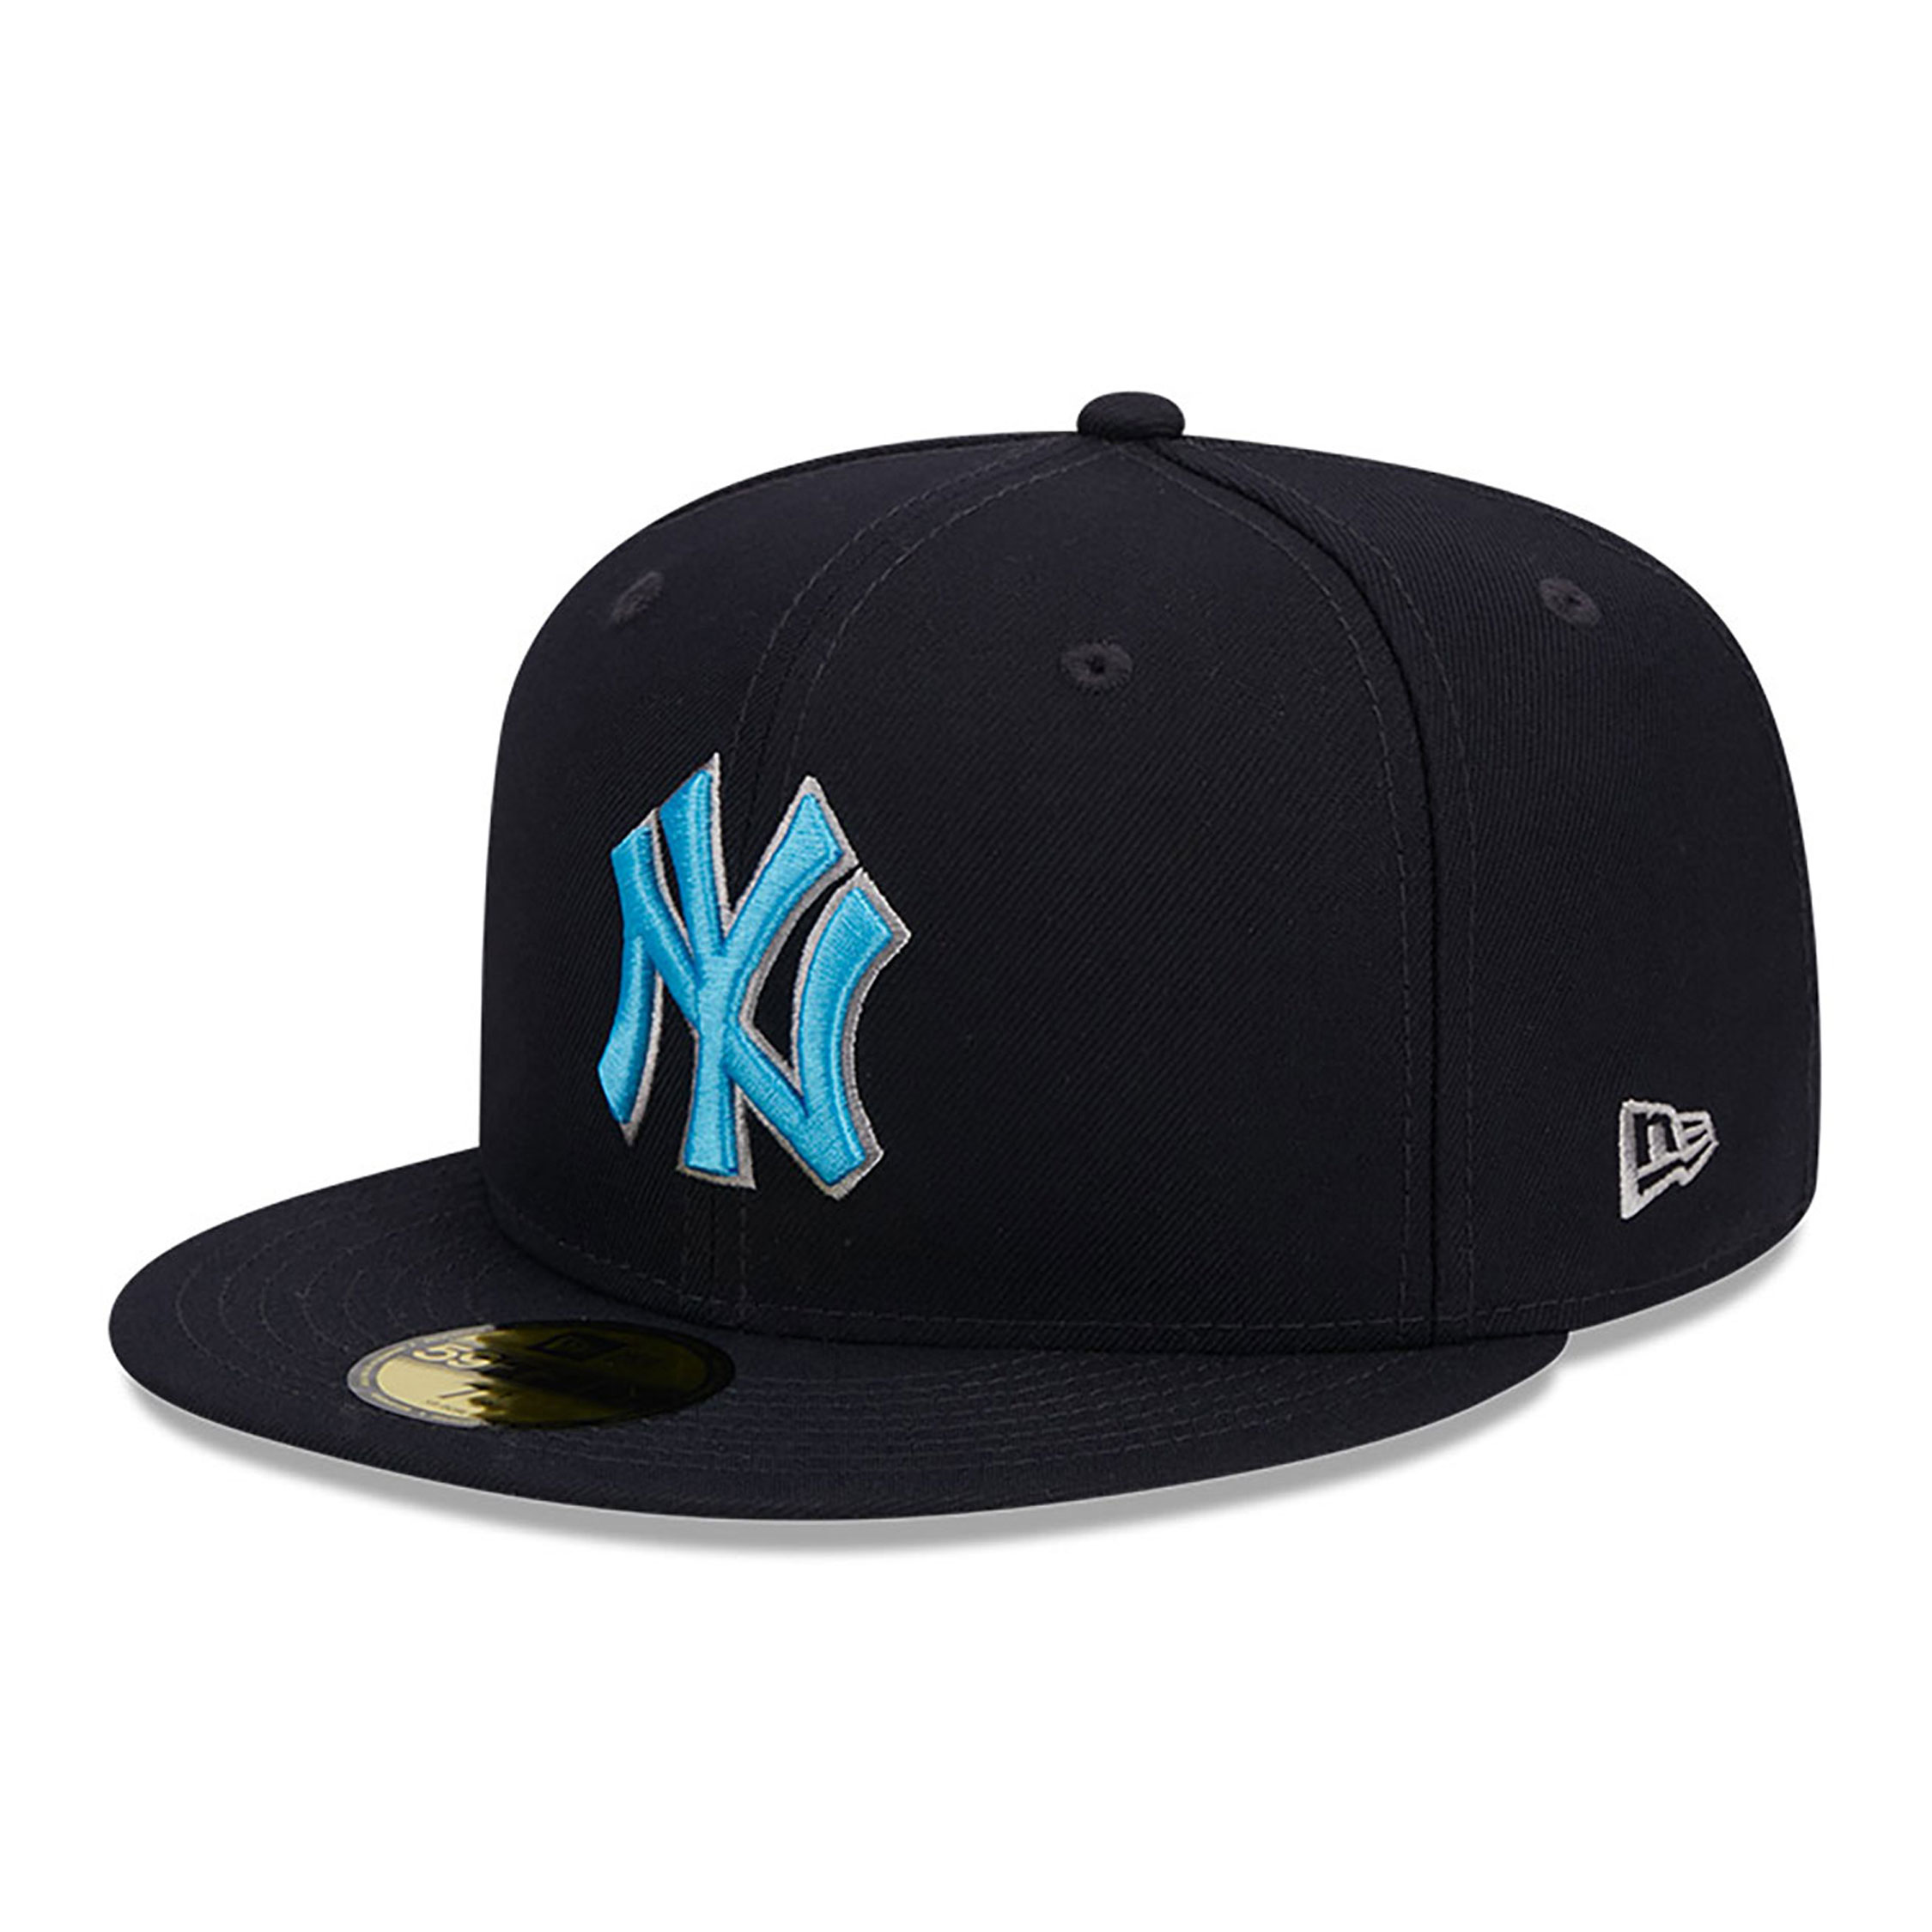 Official New Era MLB Fathers Day New York Yankees 59FIFTY Fitted Cap ...